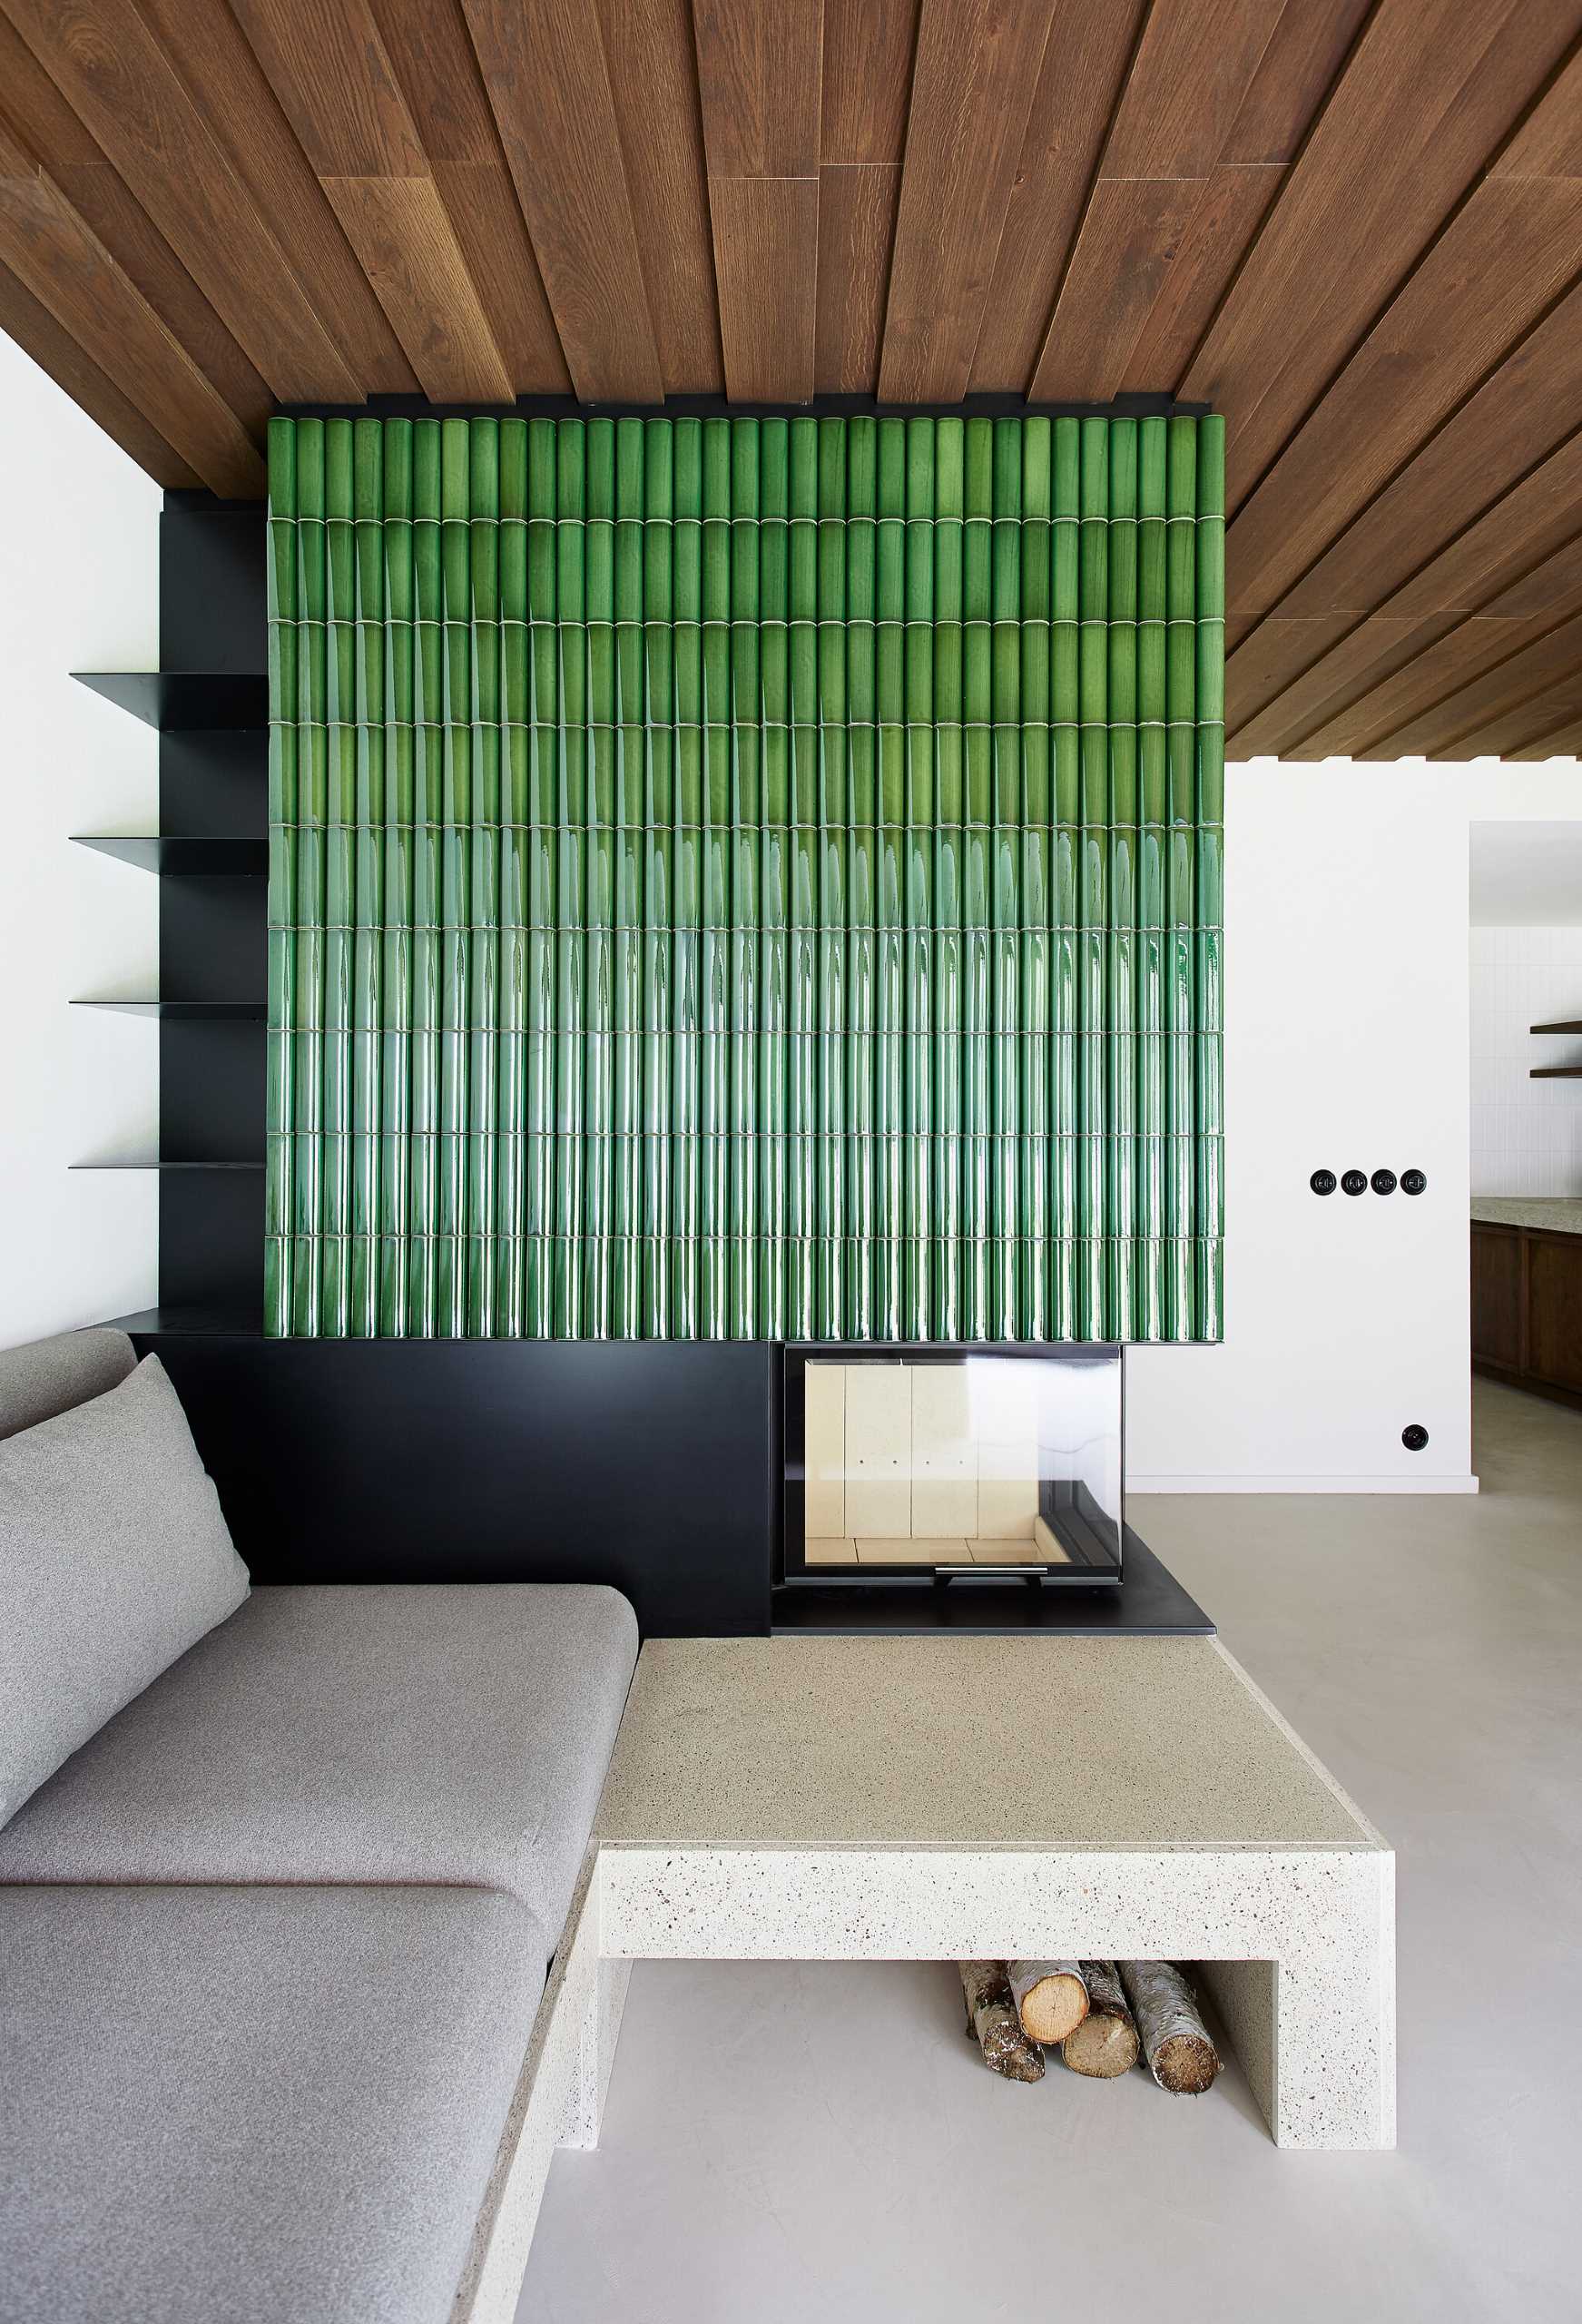 One design element that stands out in this modern living room, is the fireplace surround that's clad in bright green tiles.